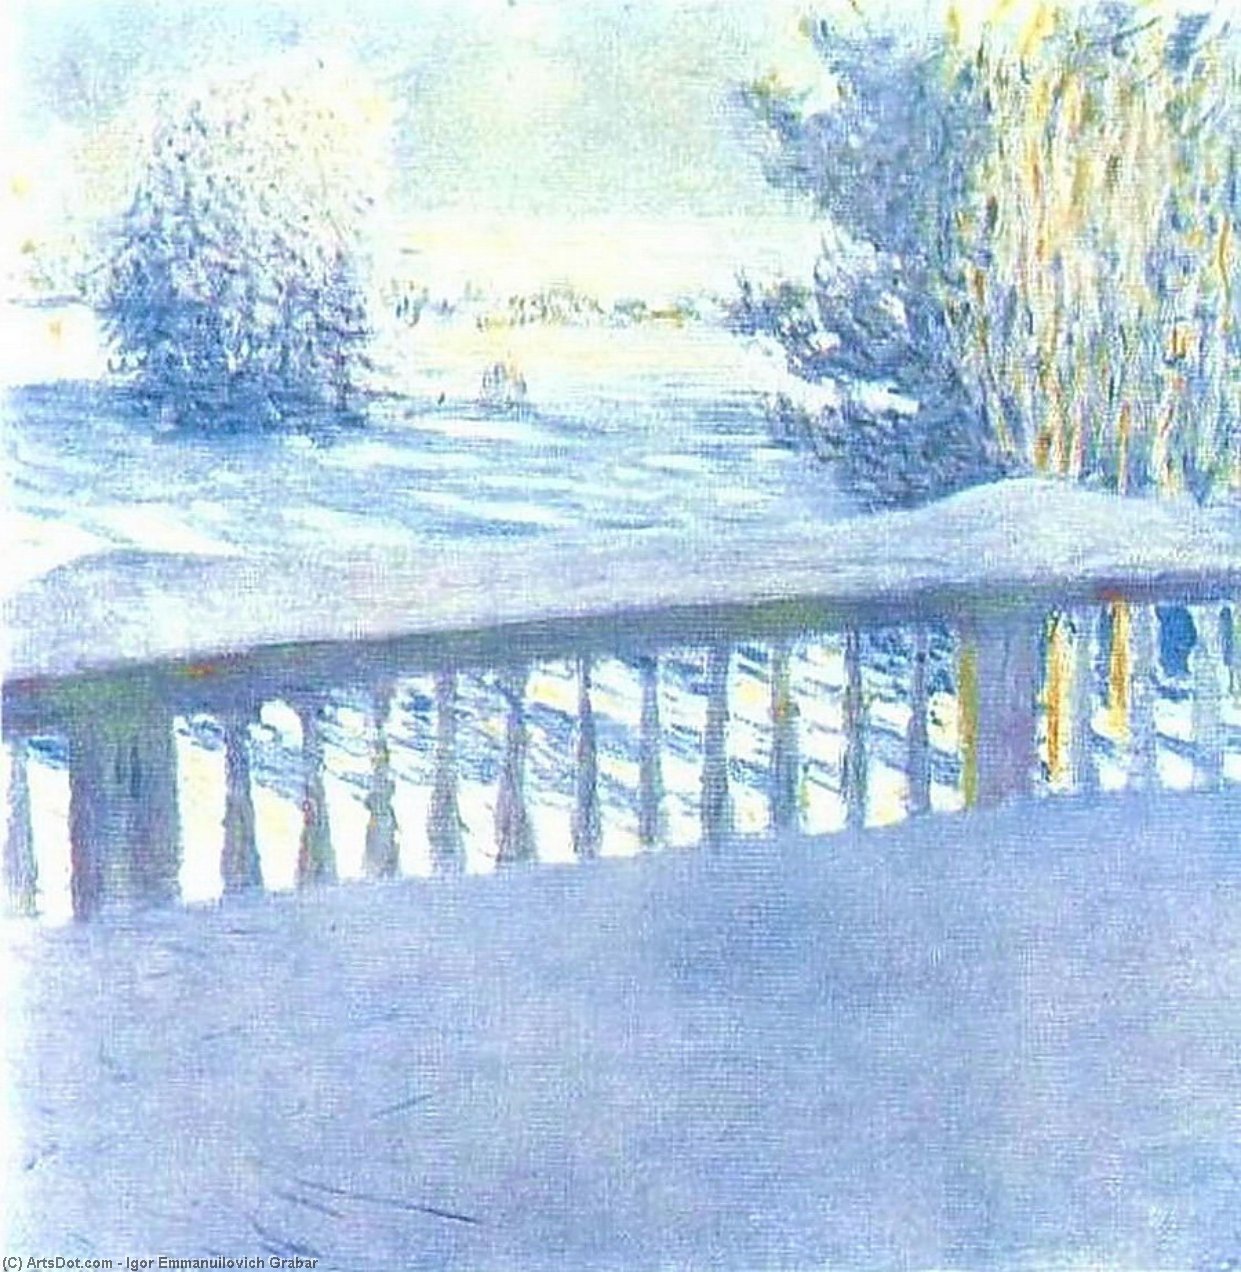 Buy Museum Art Reproductions The Frost. Sunrise by Igor Emmanuilovich Grabar (Inspired By) (1871-1960, Hungary) | ArtsDot.com